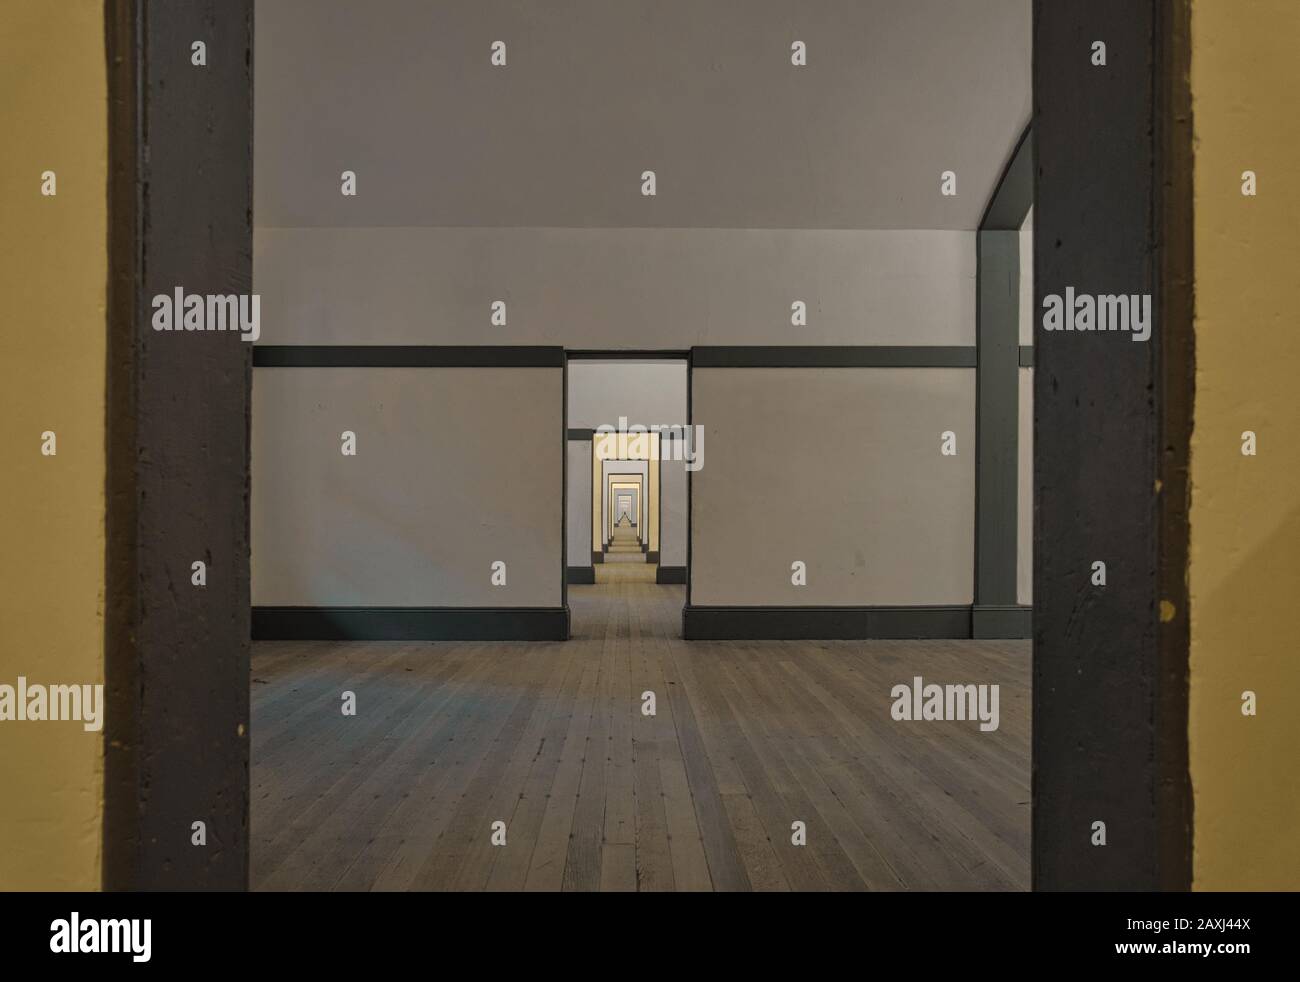 Seemingly endlessly arranged rooms with old wooden floors Stock Photo